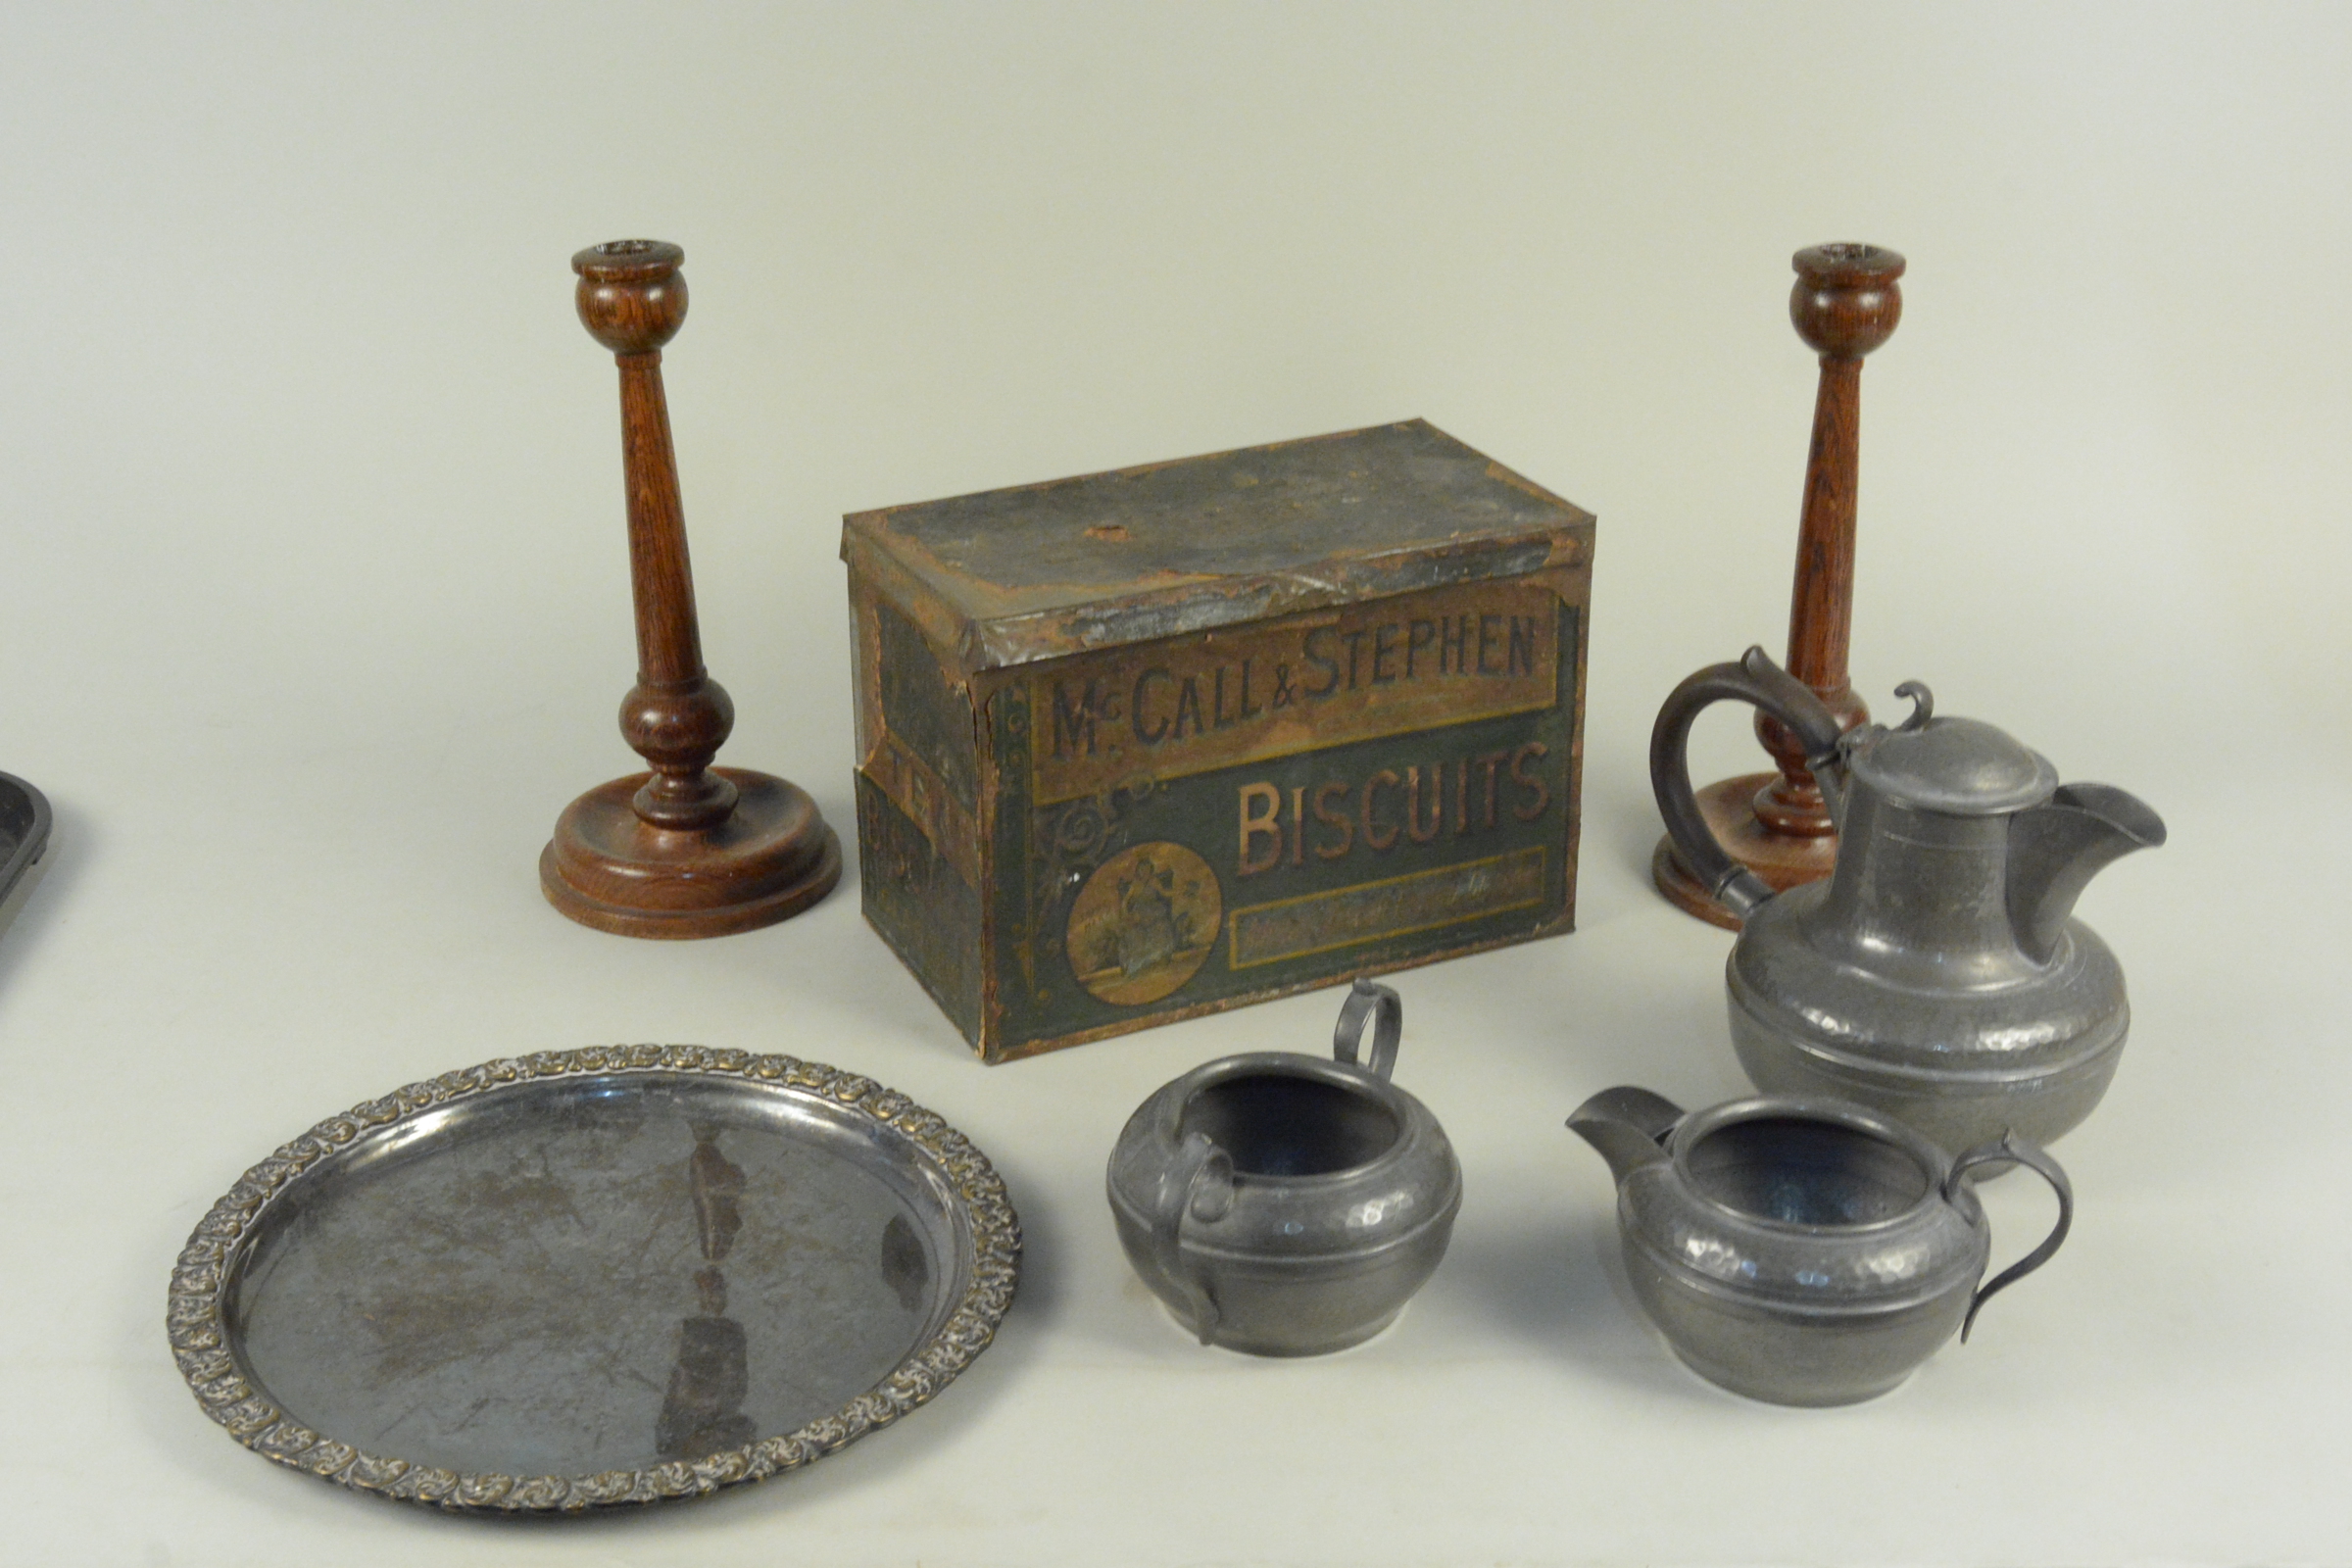 A mixed lot including a vintage McCall & Stephen biscuit tin, a three piece pewter tea set, - Image 2 of 3